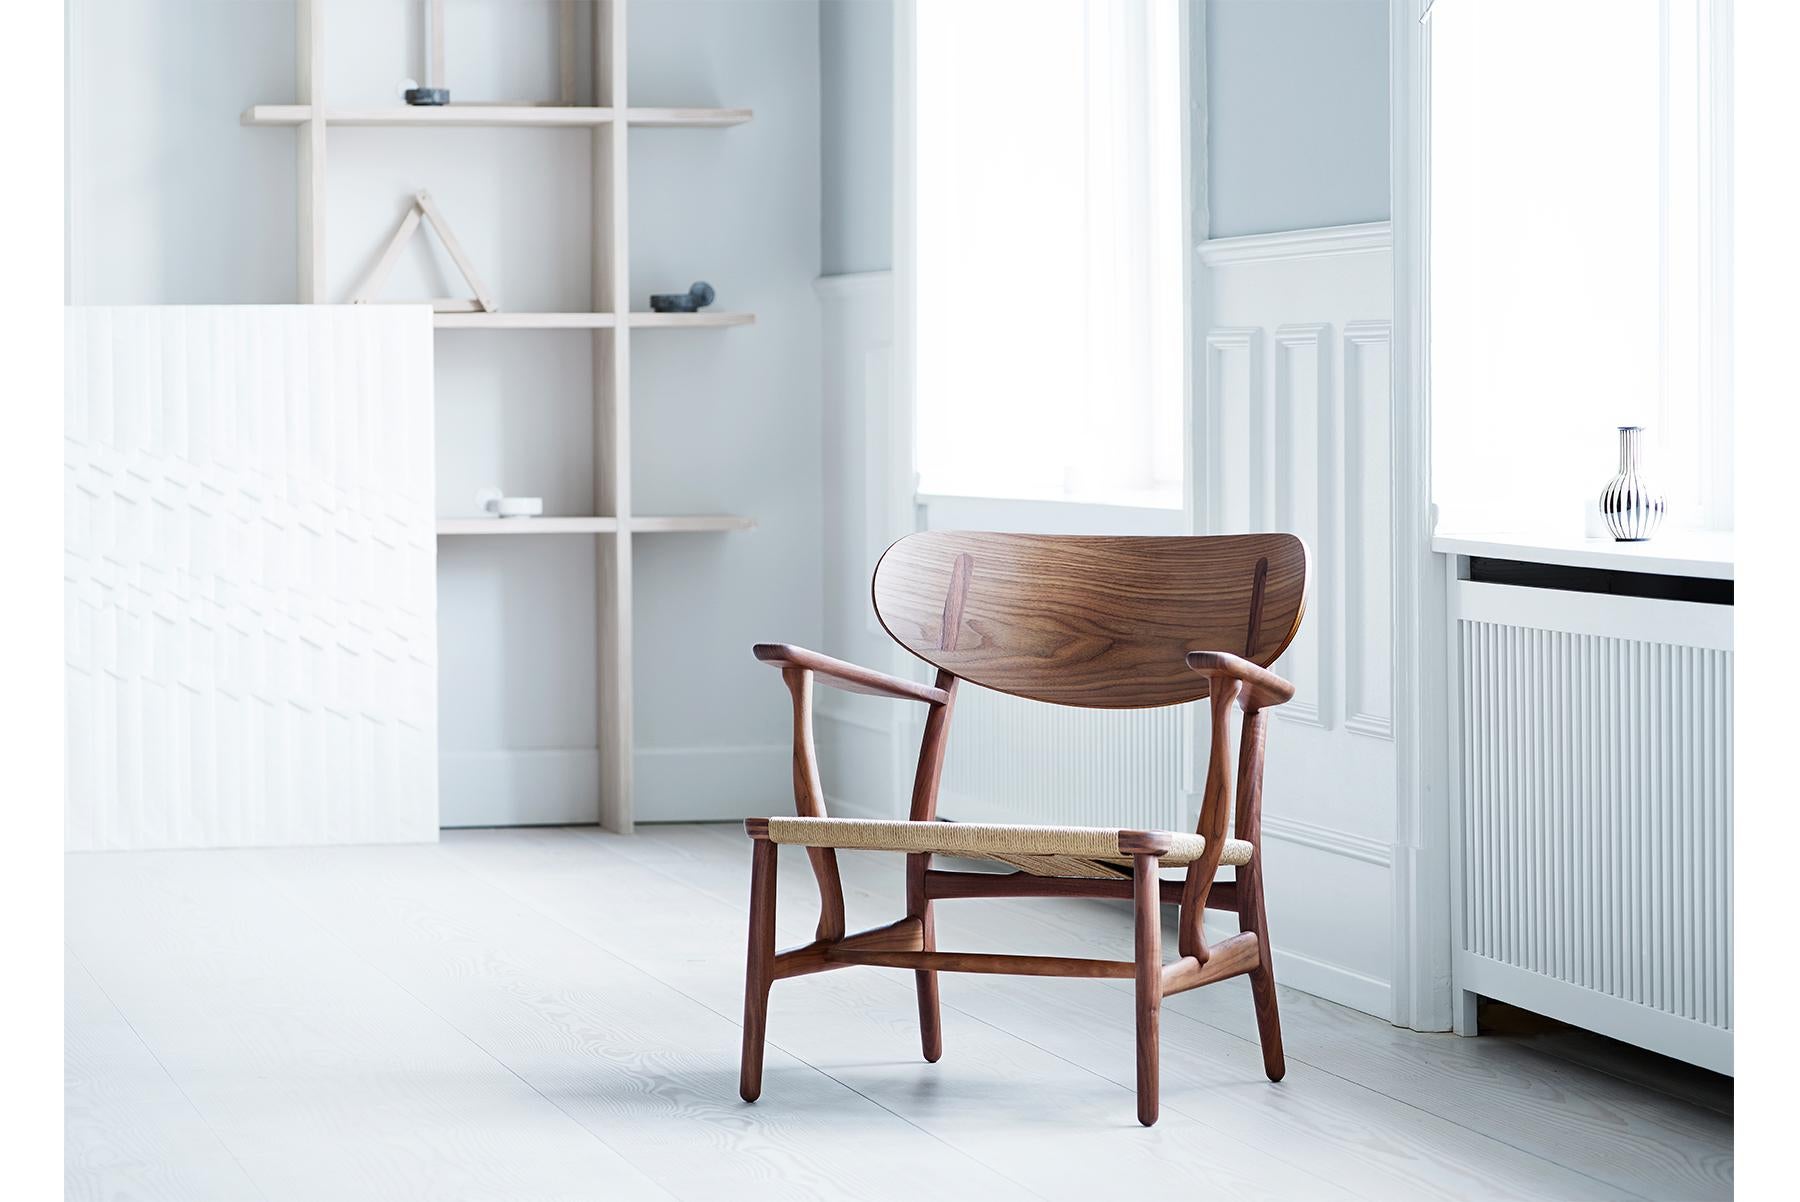 The CH22 lounge chair was one of the first chairs in Hans J. Wegner’s debut collection created exclusively for Carl Hansen & Søn in 1950 – a series that would become iconic for its representation of the modern Danish design philosophy.
 